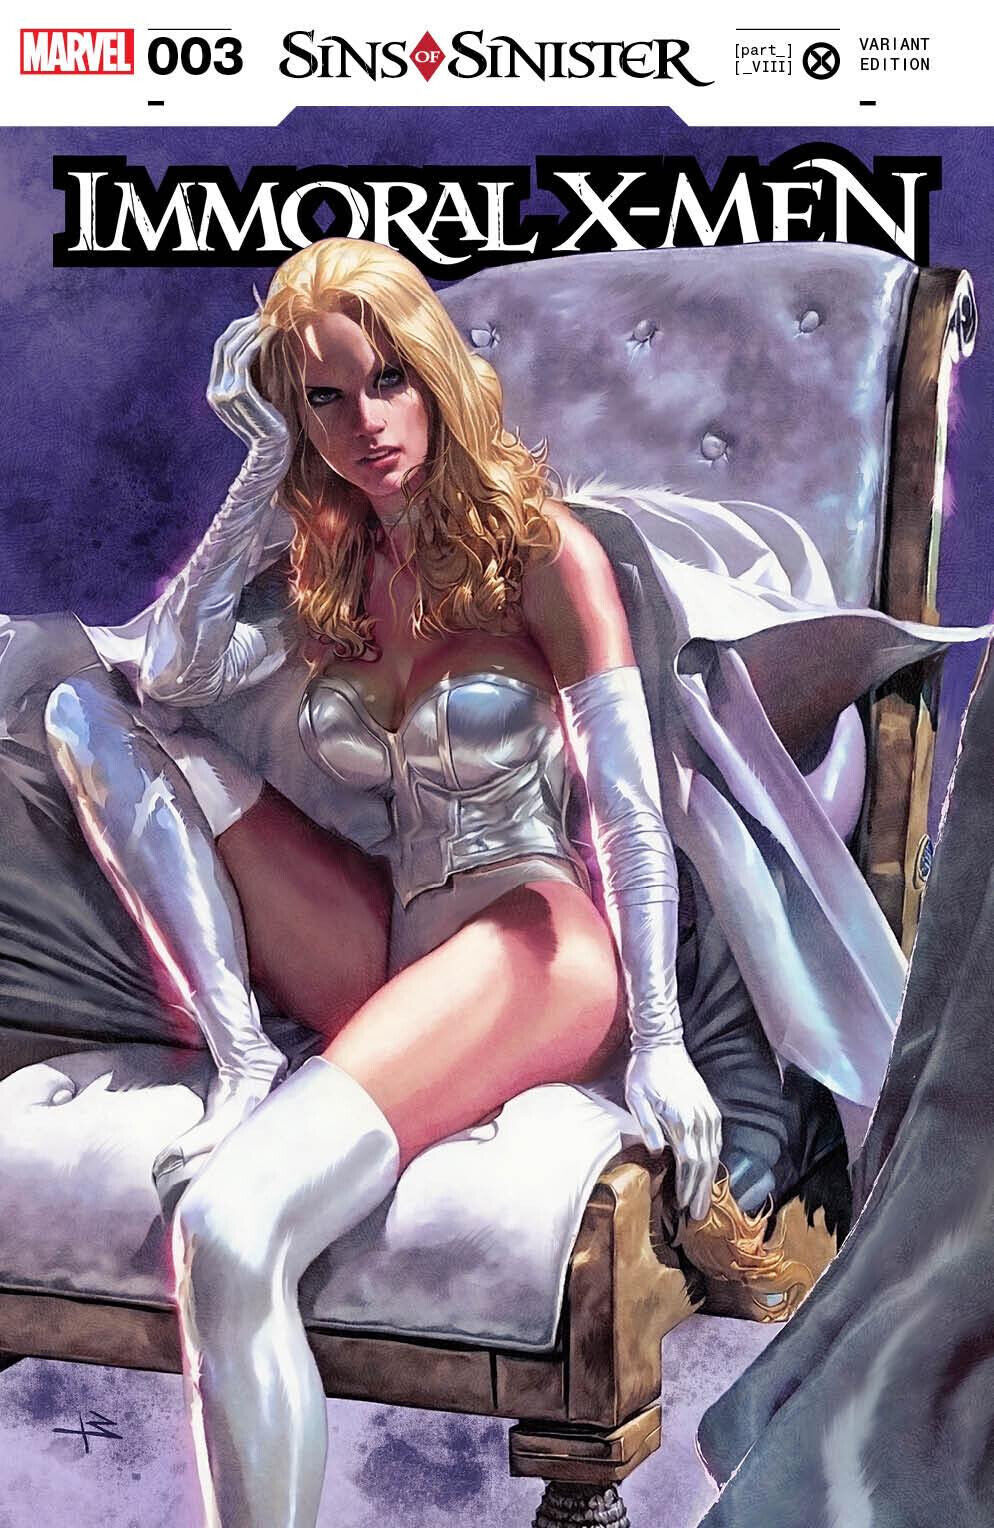 IMMORAL X-MEN #3 (MARCO TURINI EXCLUSIVE EMMA FROST VARIANT) ~ Marvel